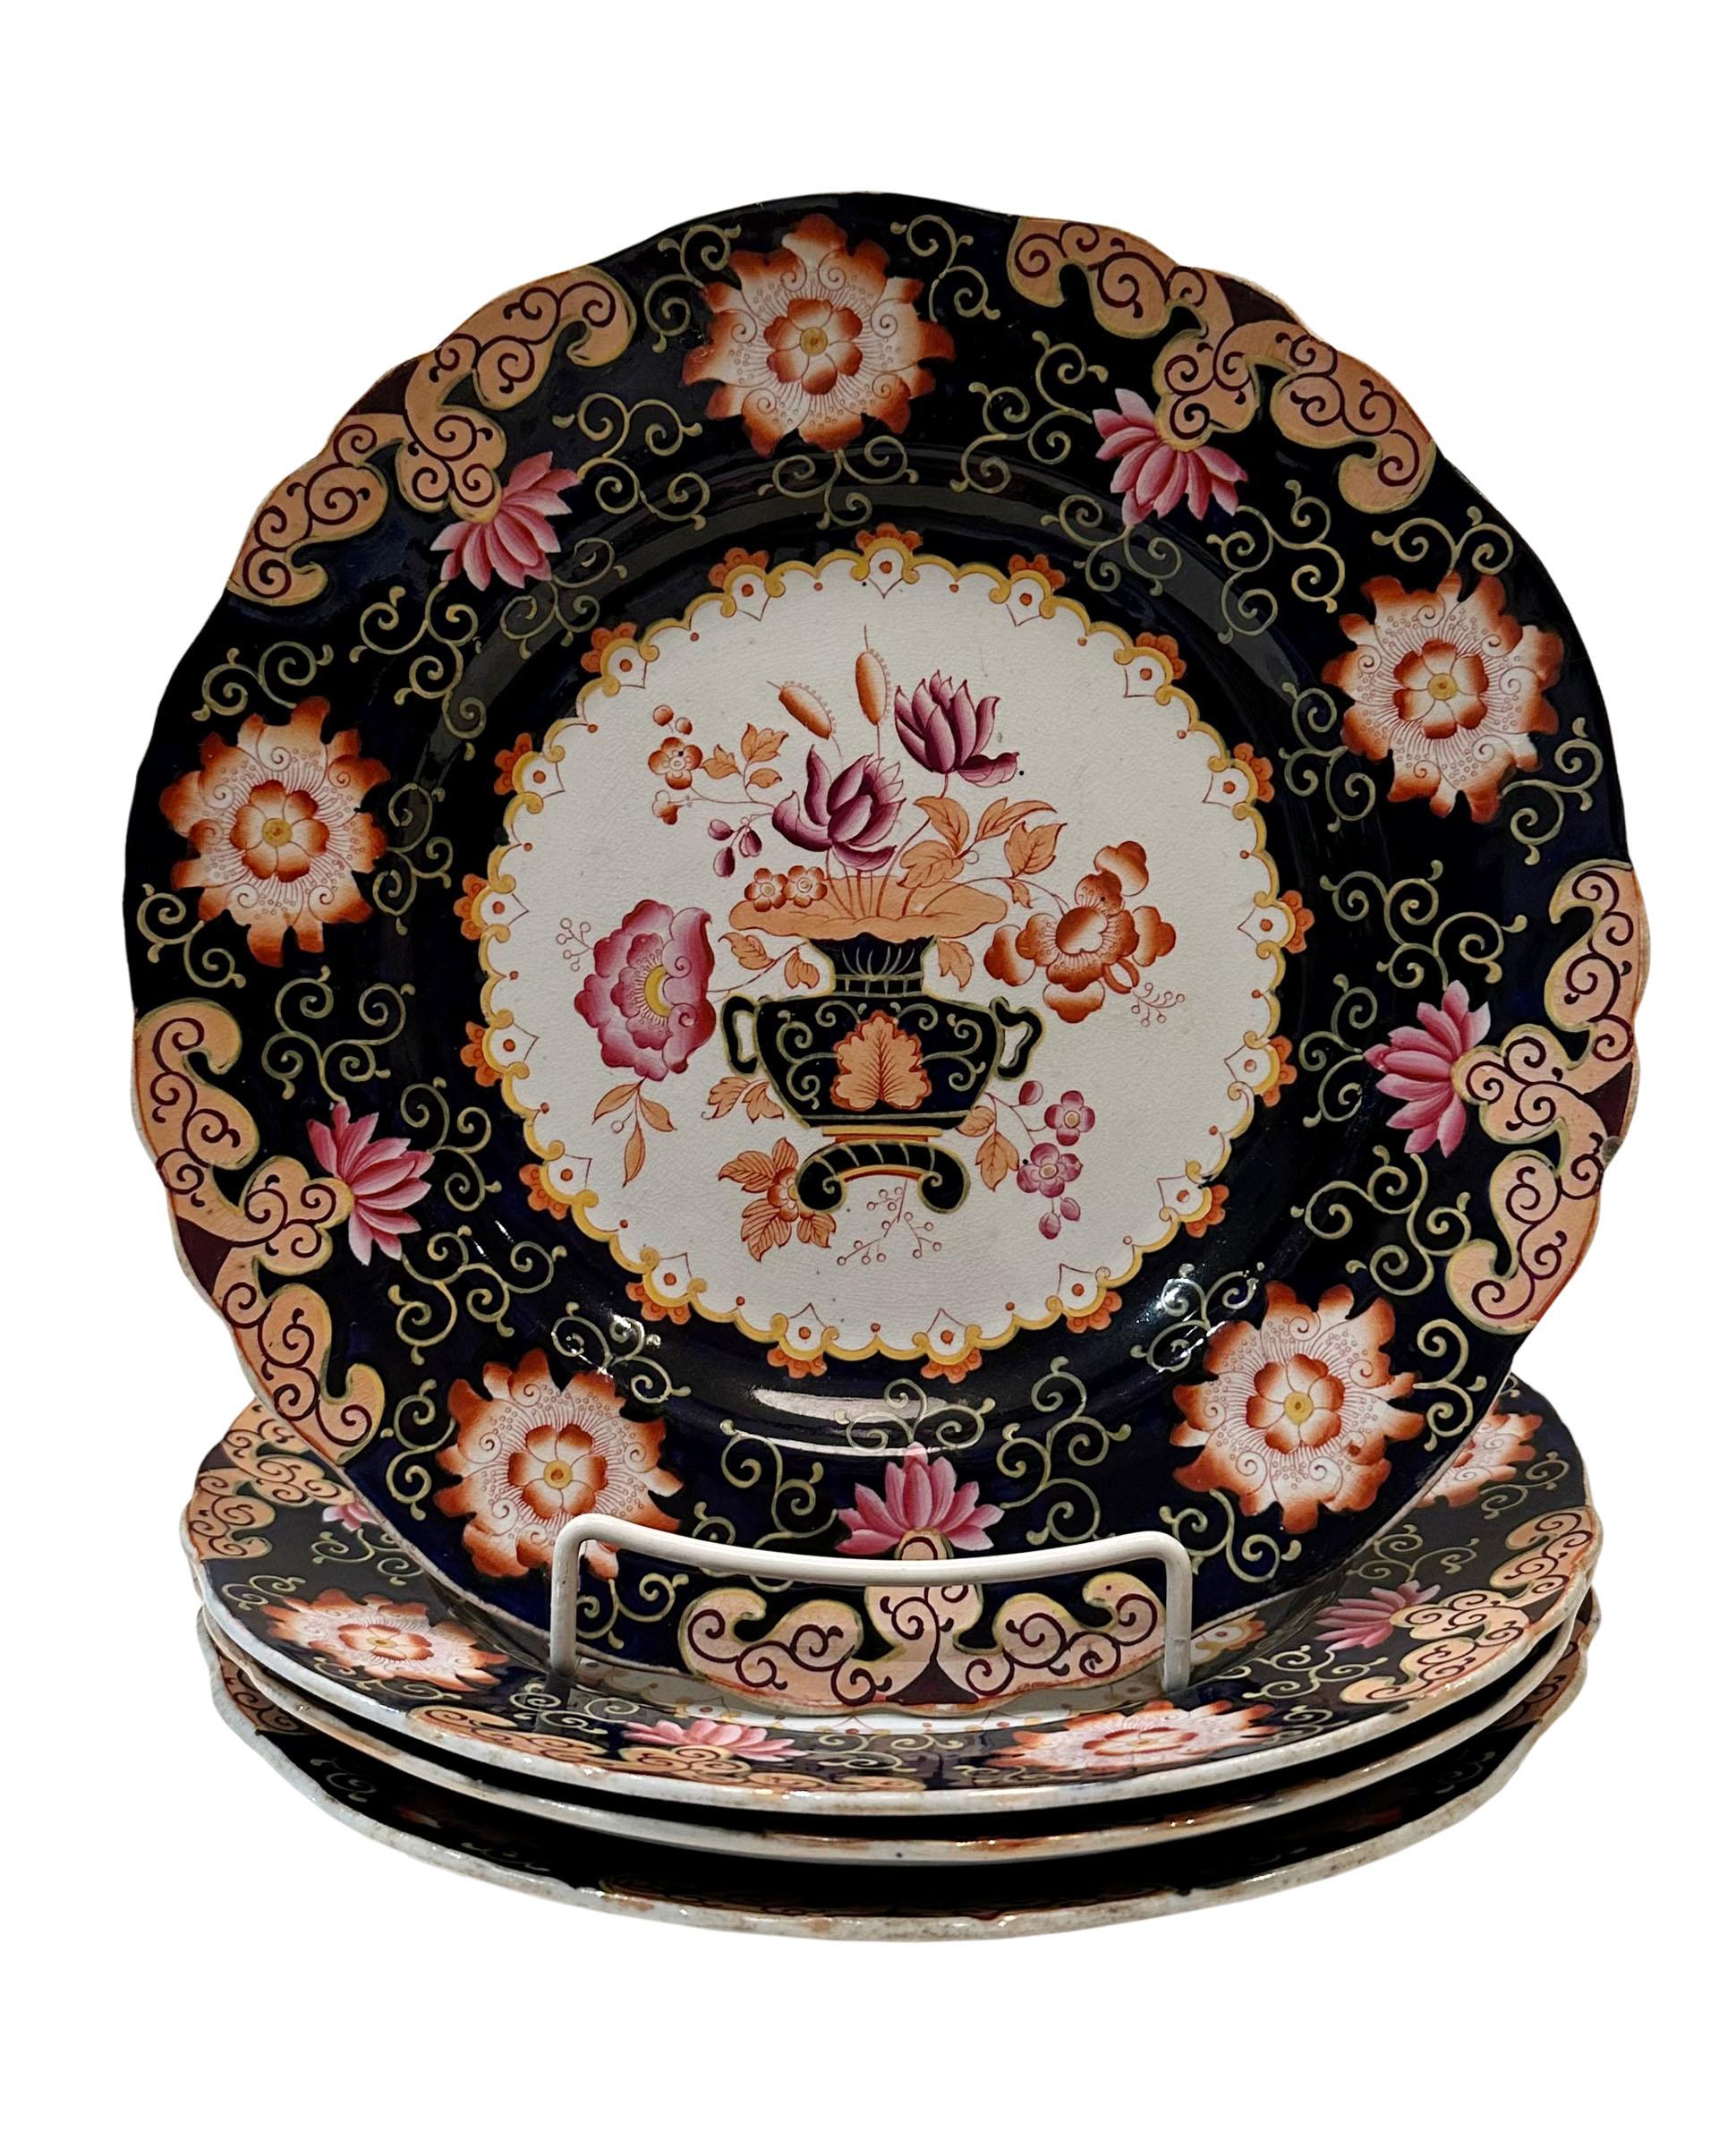 An Imari pattern Royal Worcester dessert plate with gold gilt. Circa 1890s, England. Five available.